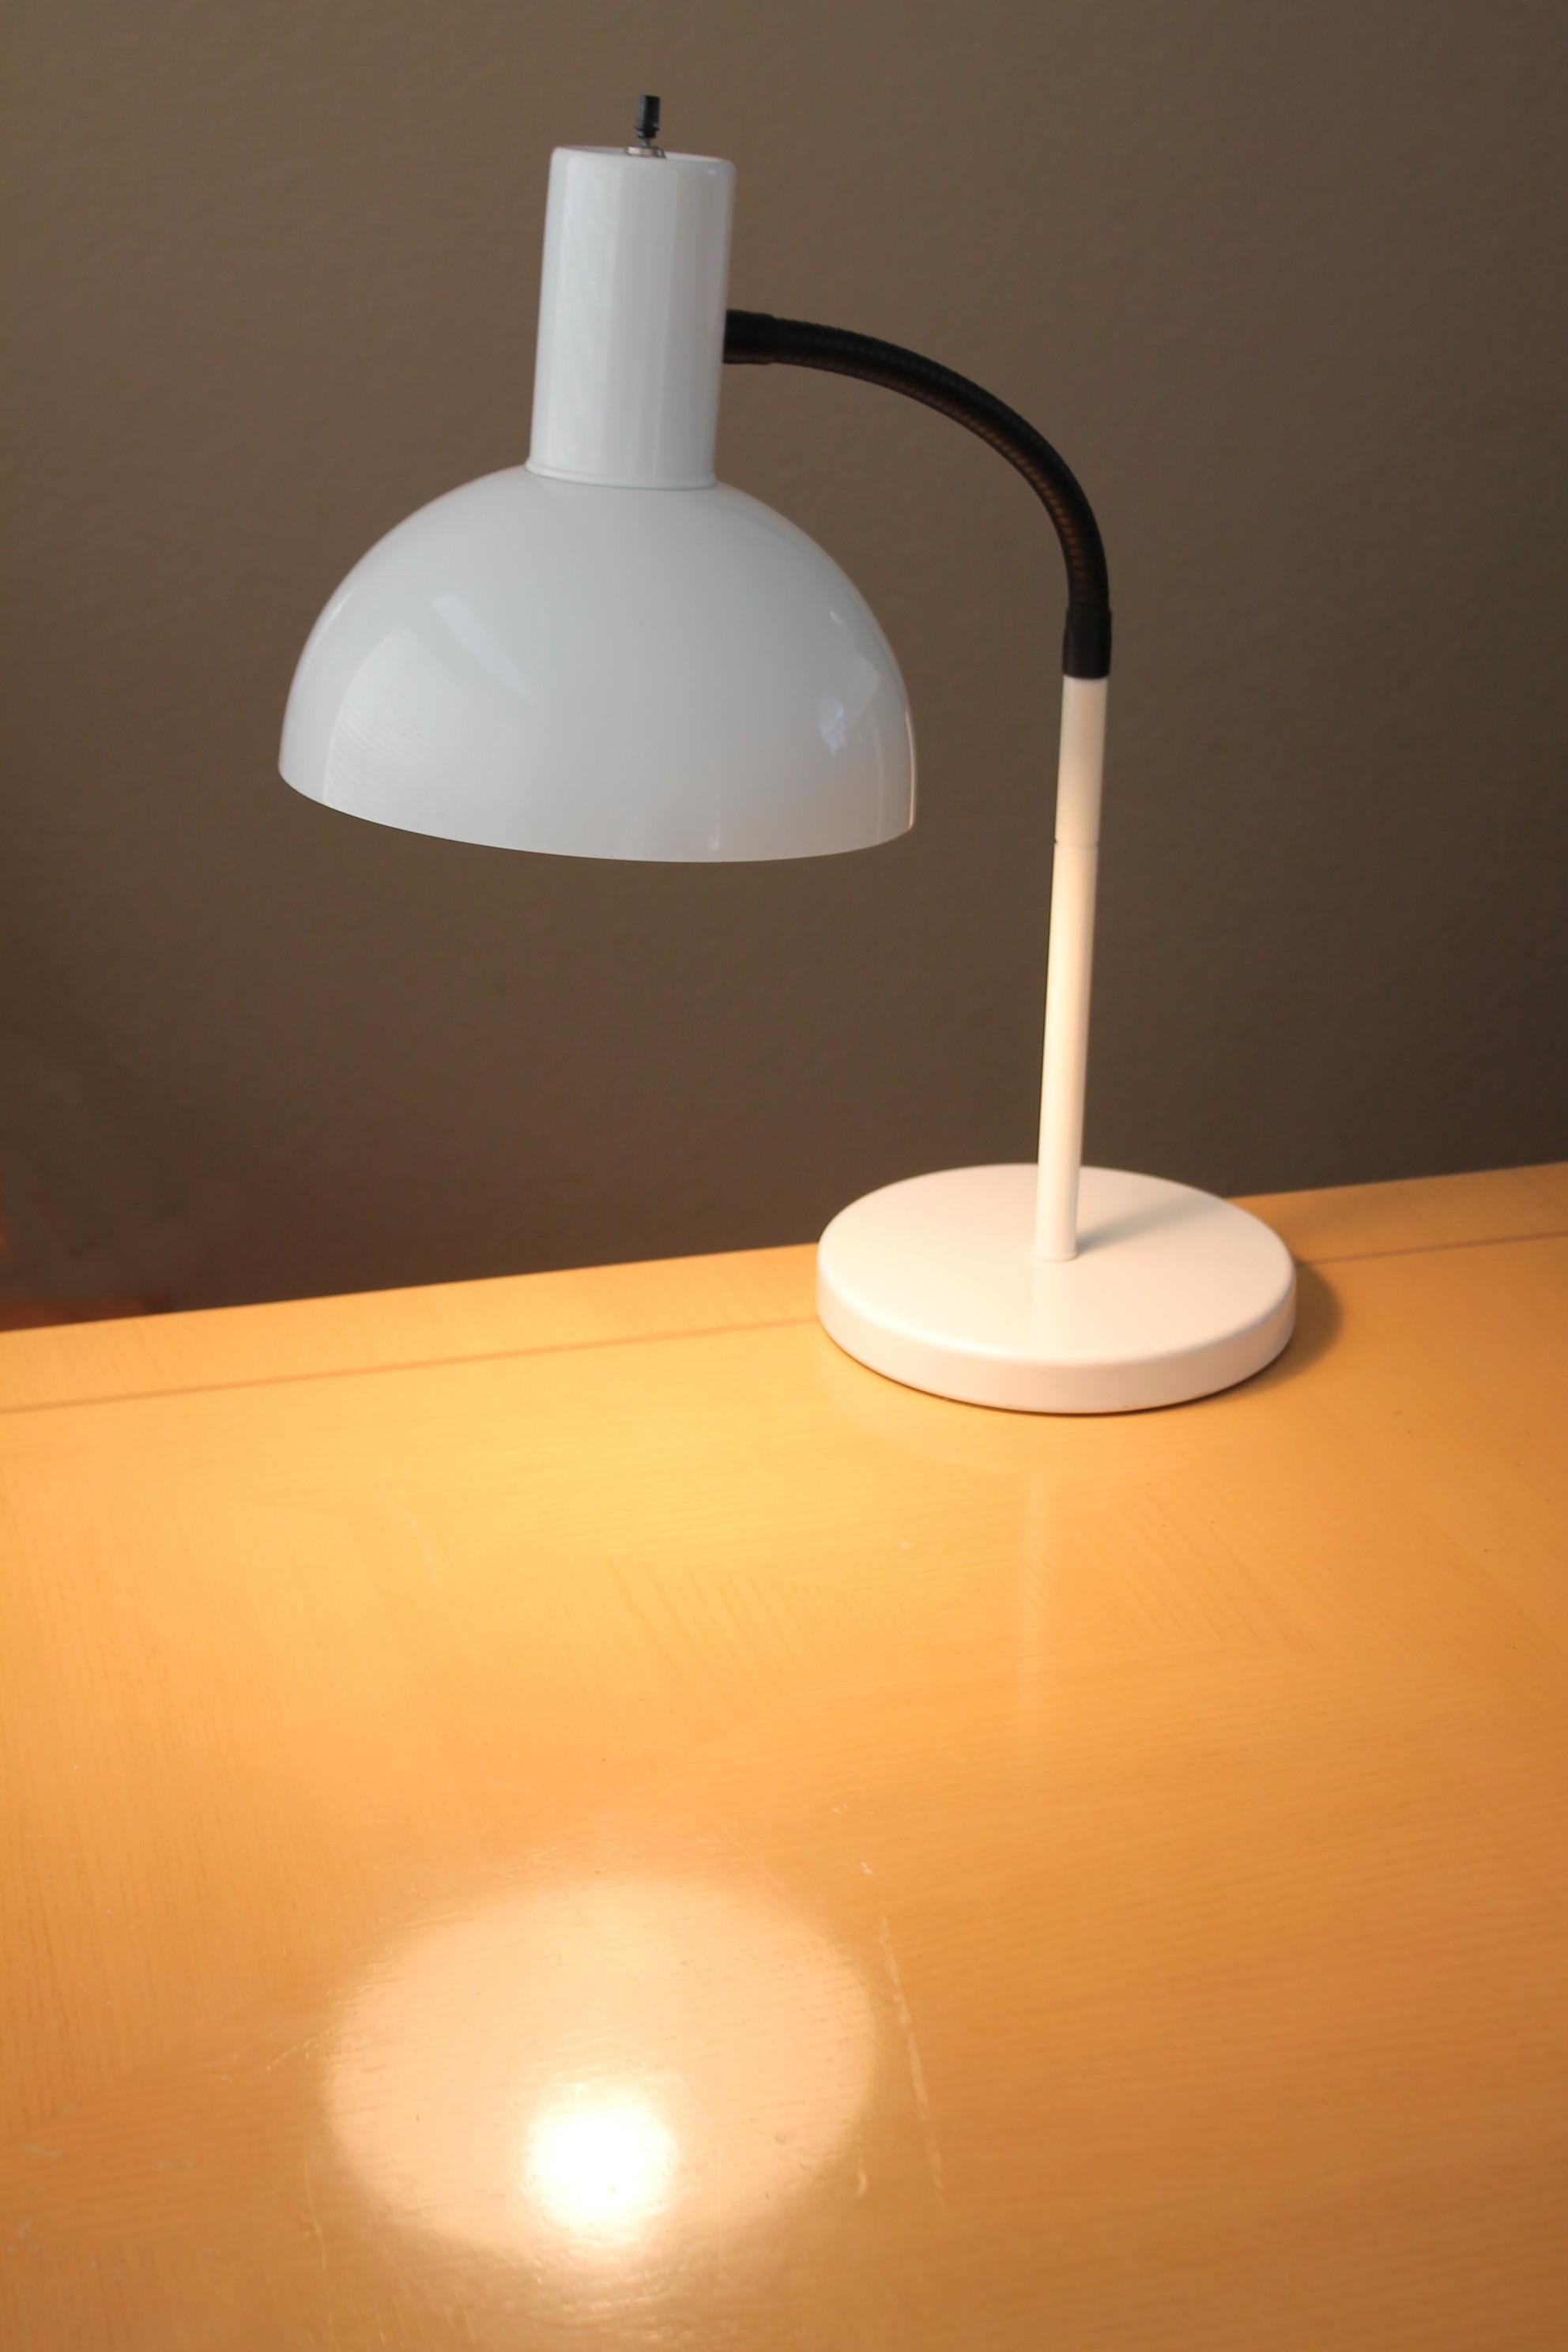 Minty!


Stunning White & Black
Sonneman Articulating
Desk/Table Lamp

Circa 1970

This is a magnificent example of the iconic articulating desk lamp by Sonneman!  The large oversized shade looks perfectly proportioned with the base and neck of the